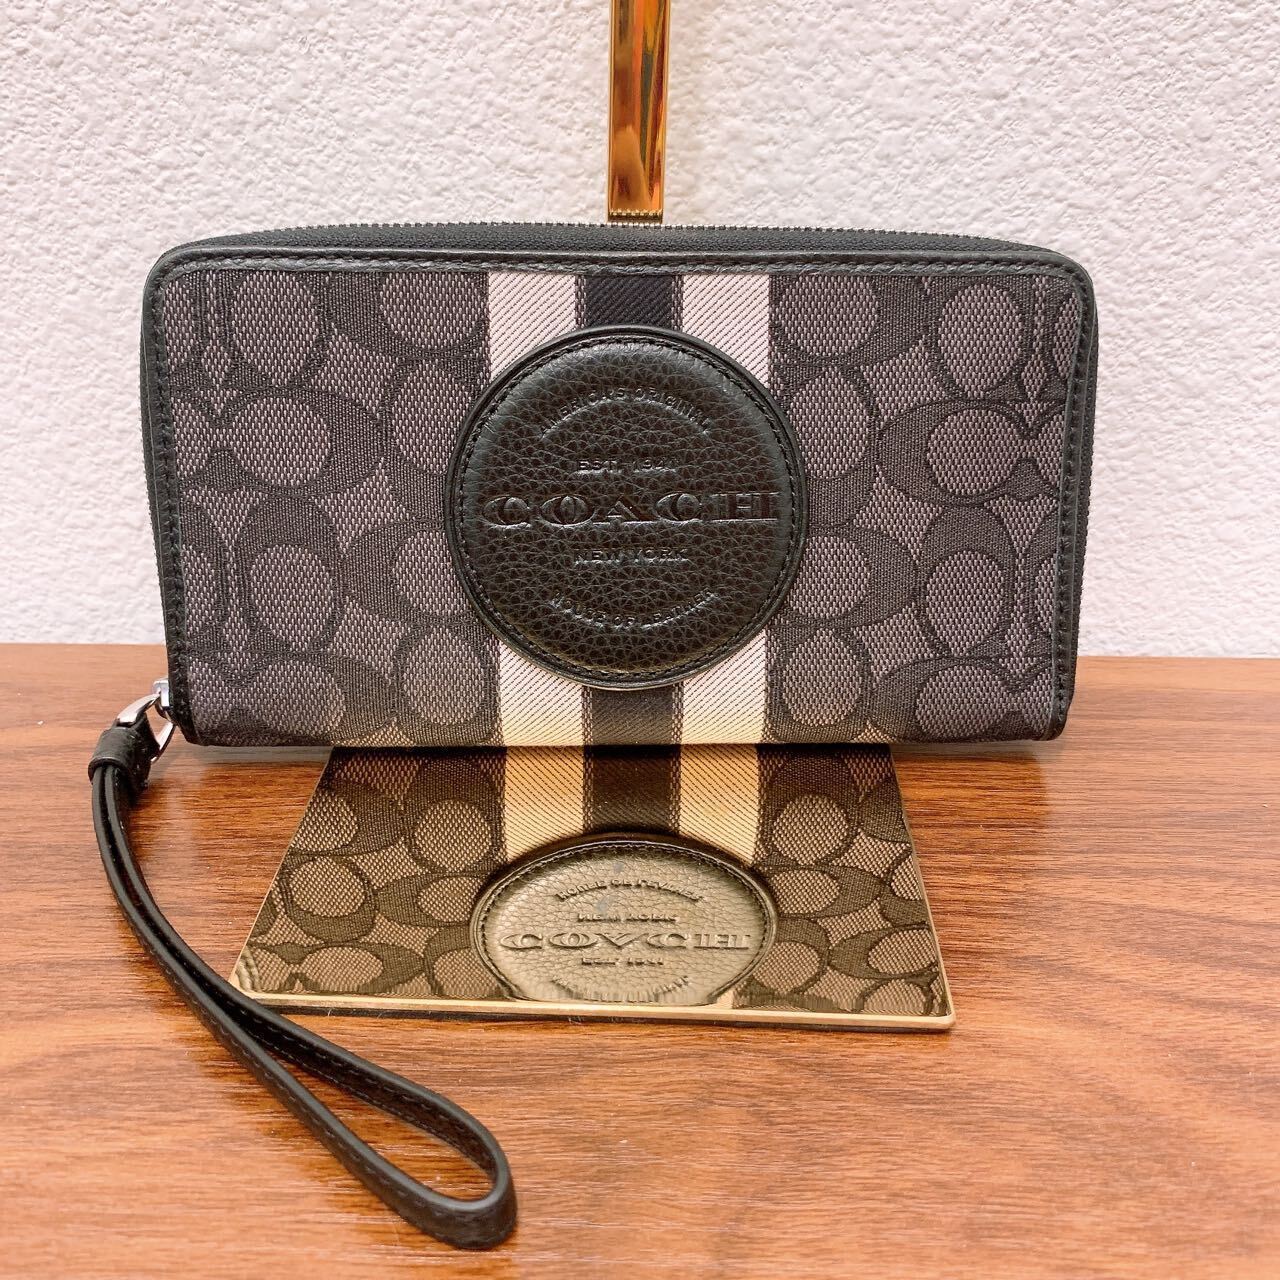 Nwt Coach Dempsey Large Phone Wallet In Signature Jacquard With